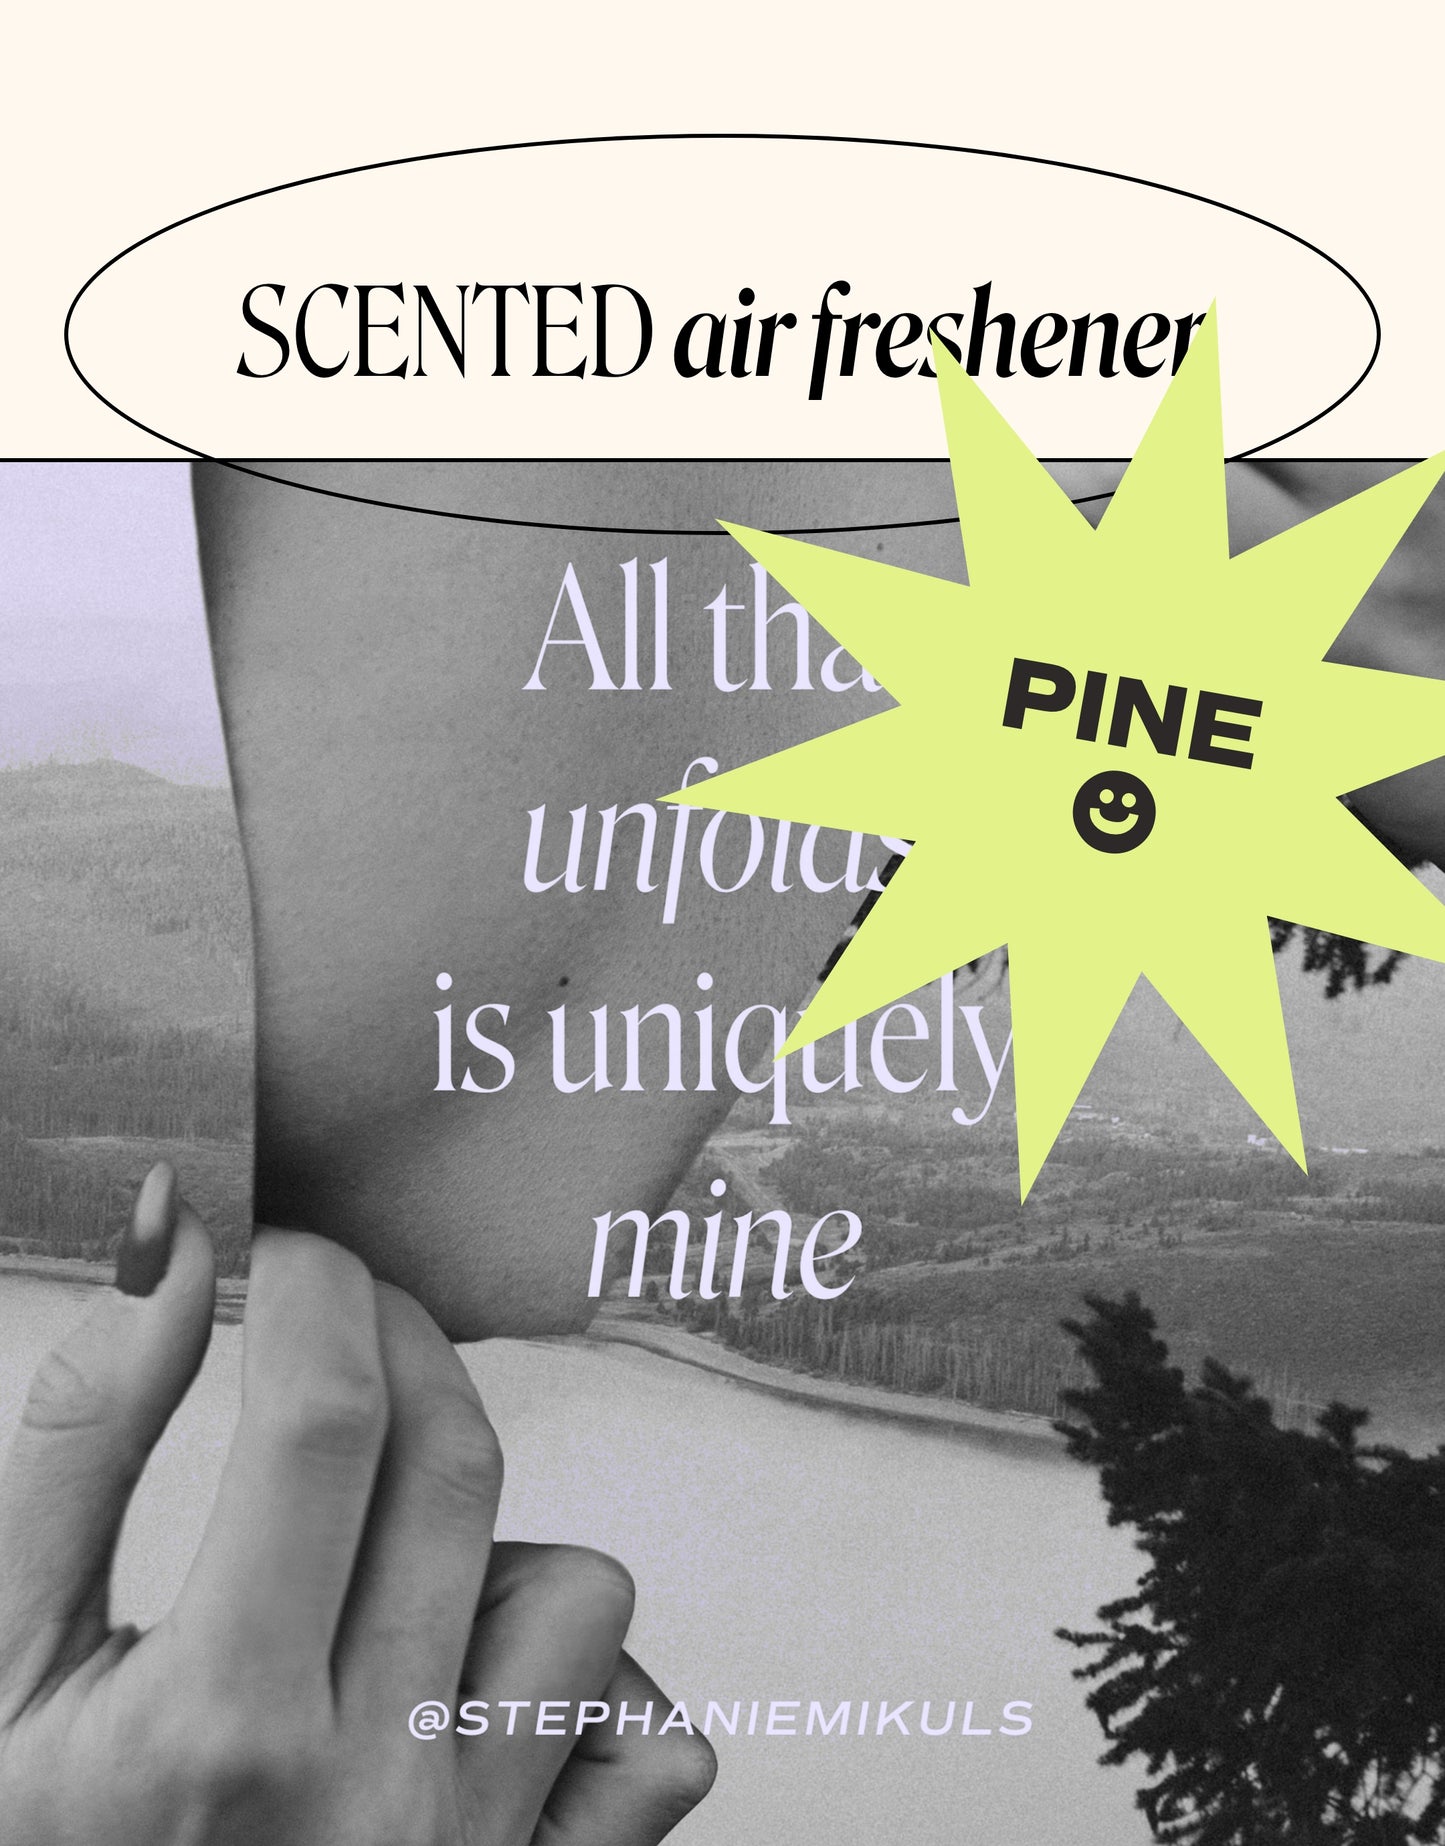 ‘All that unfolds is uniquely mine’ air freshener